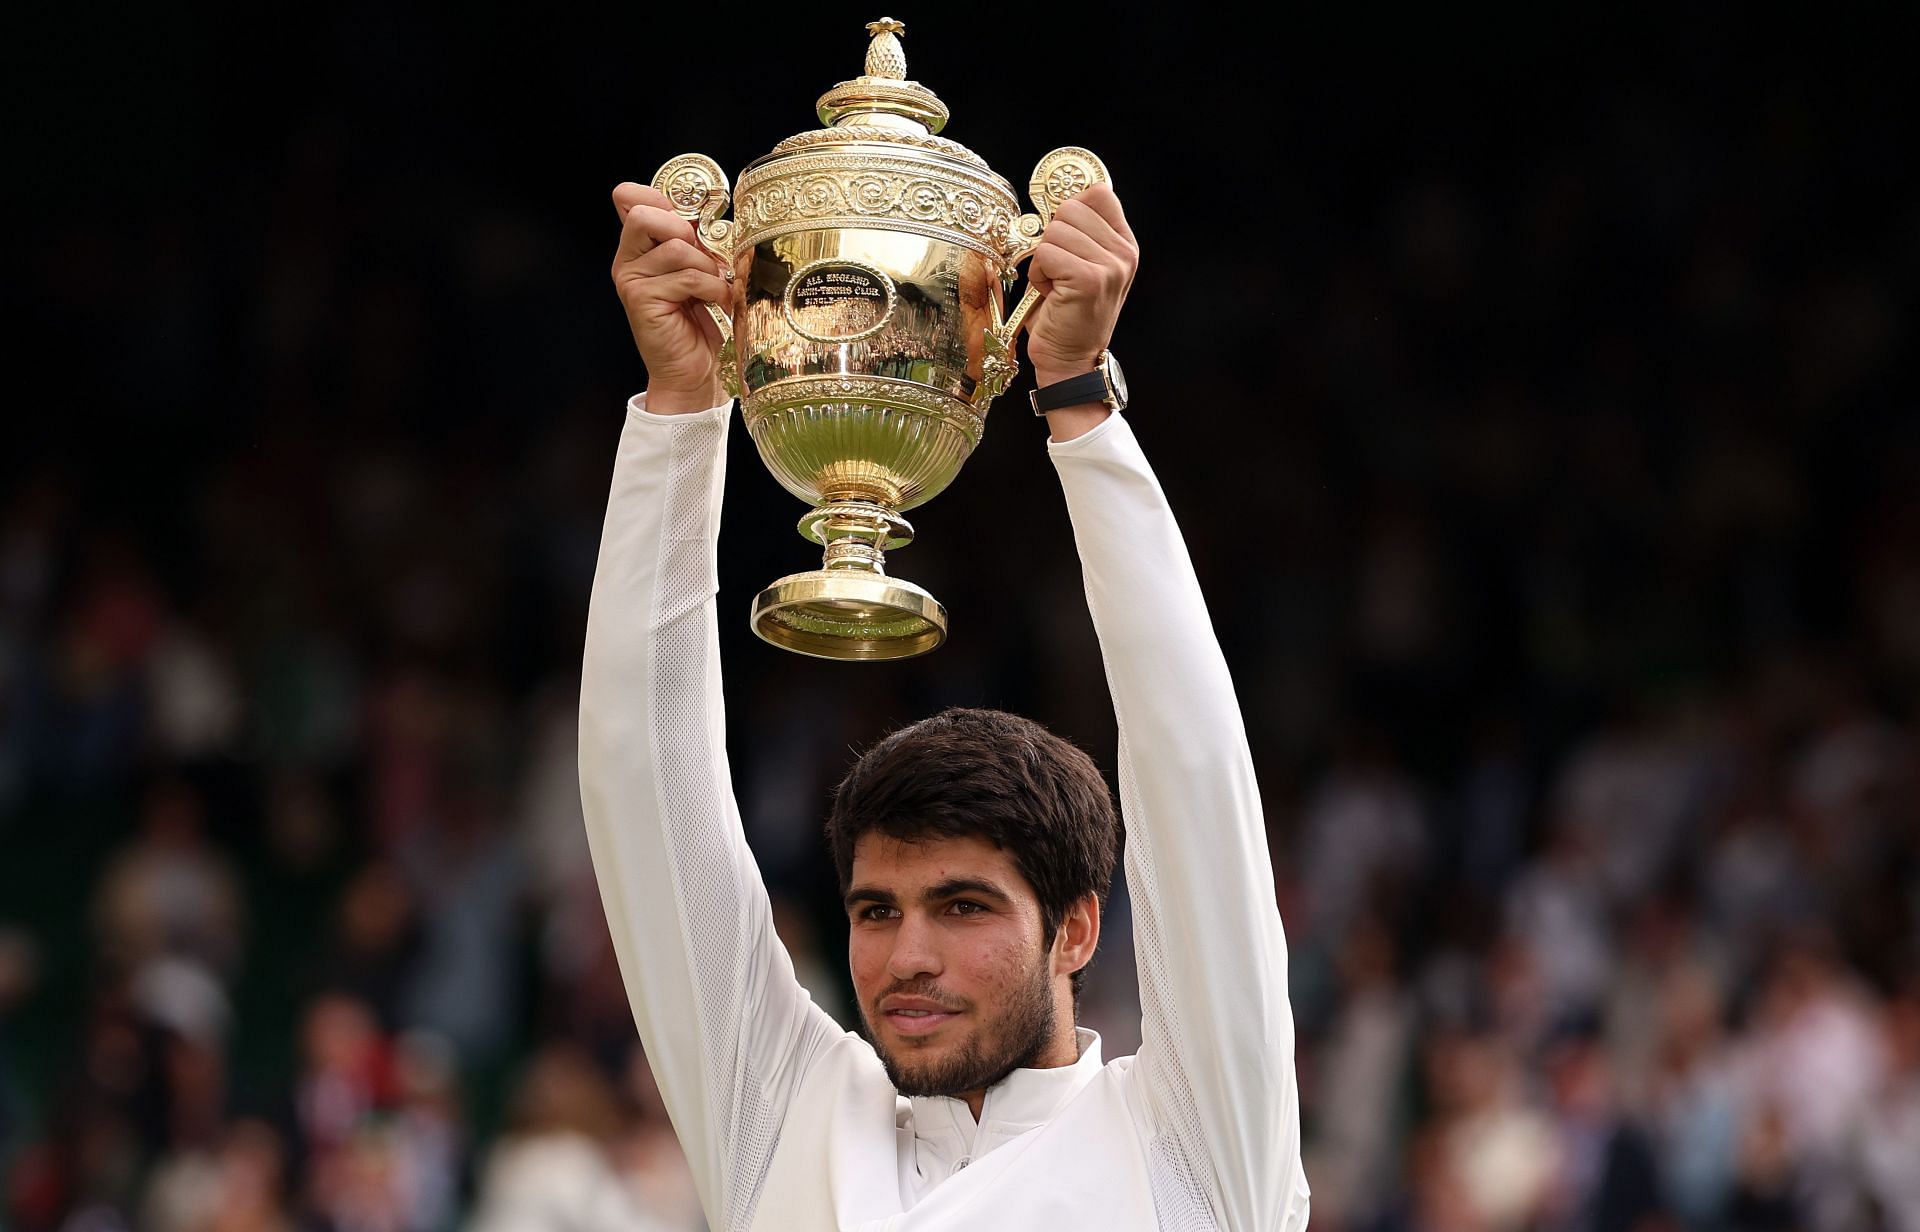 Carlos Alcaraz with the trophy after winning the 2023 Wimbledon Championship